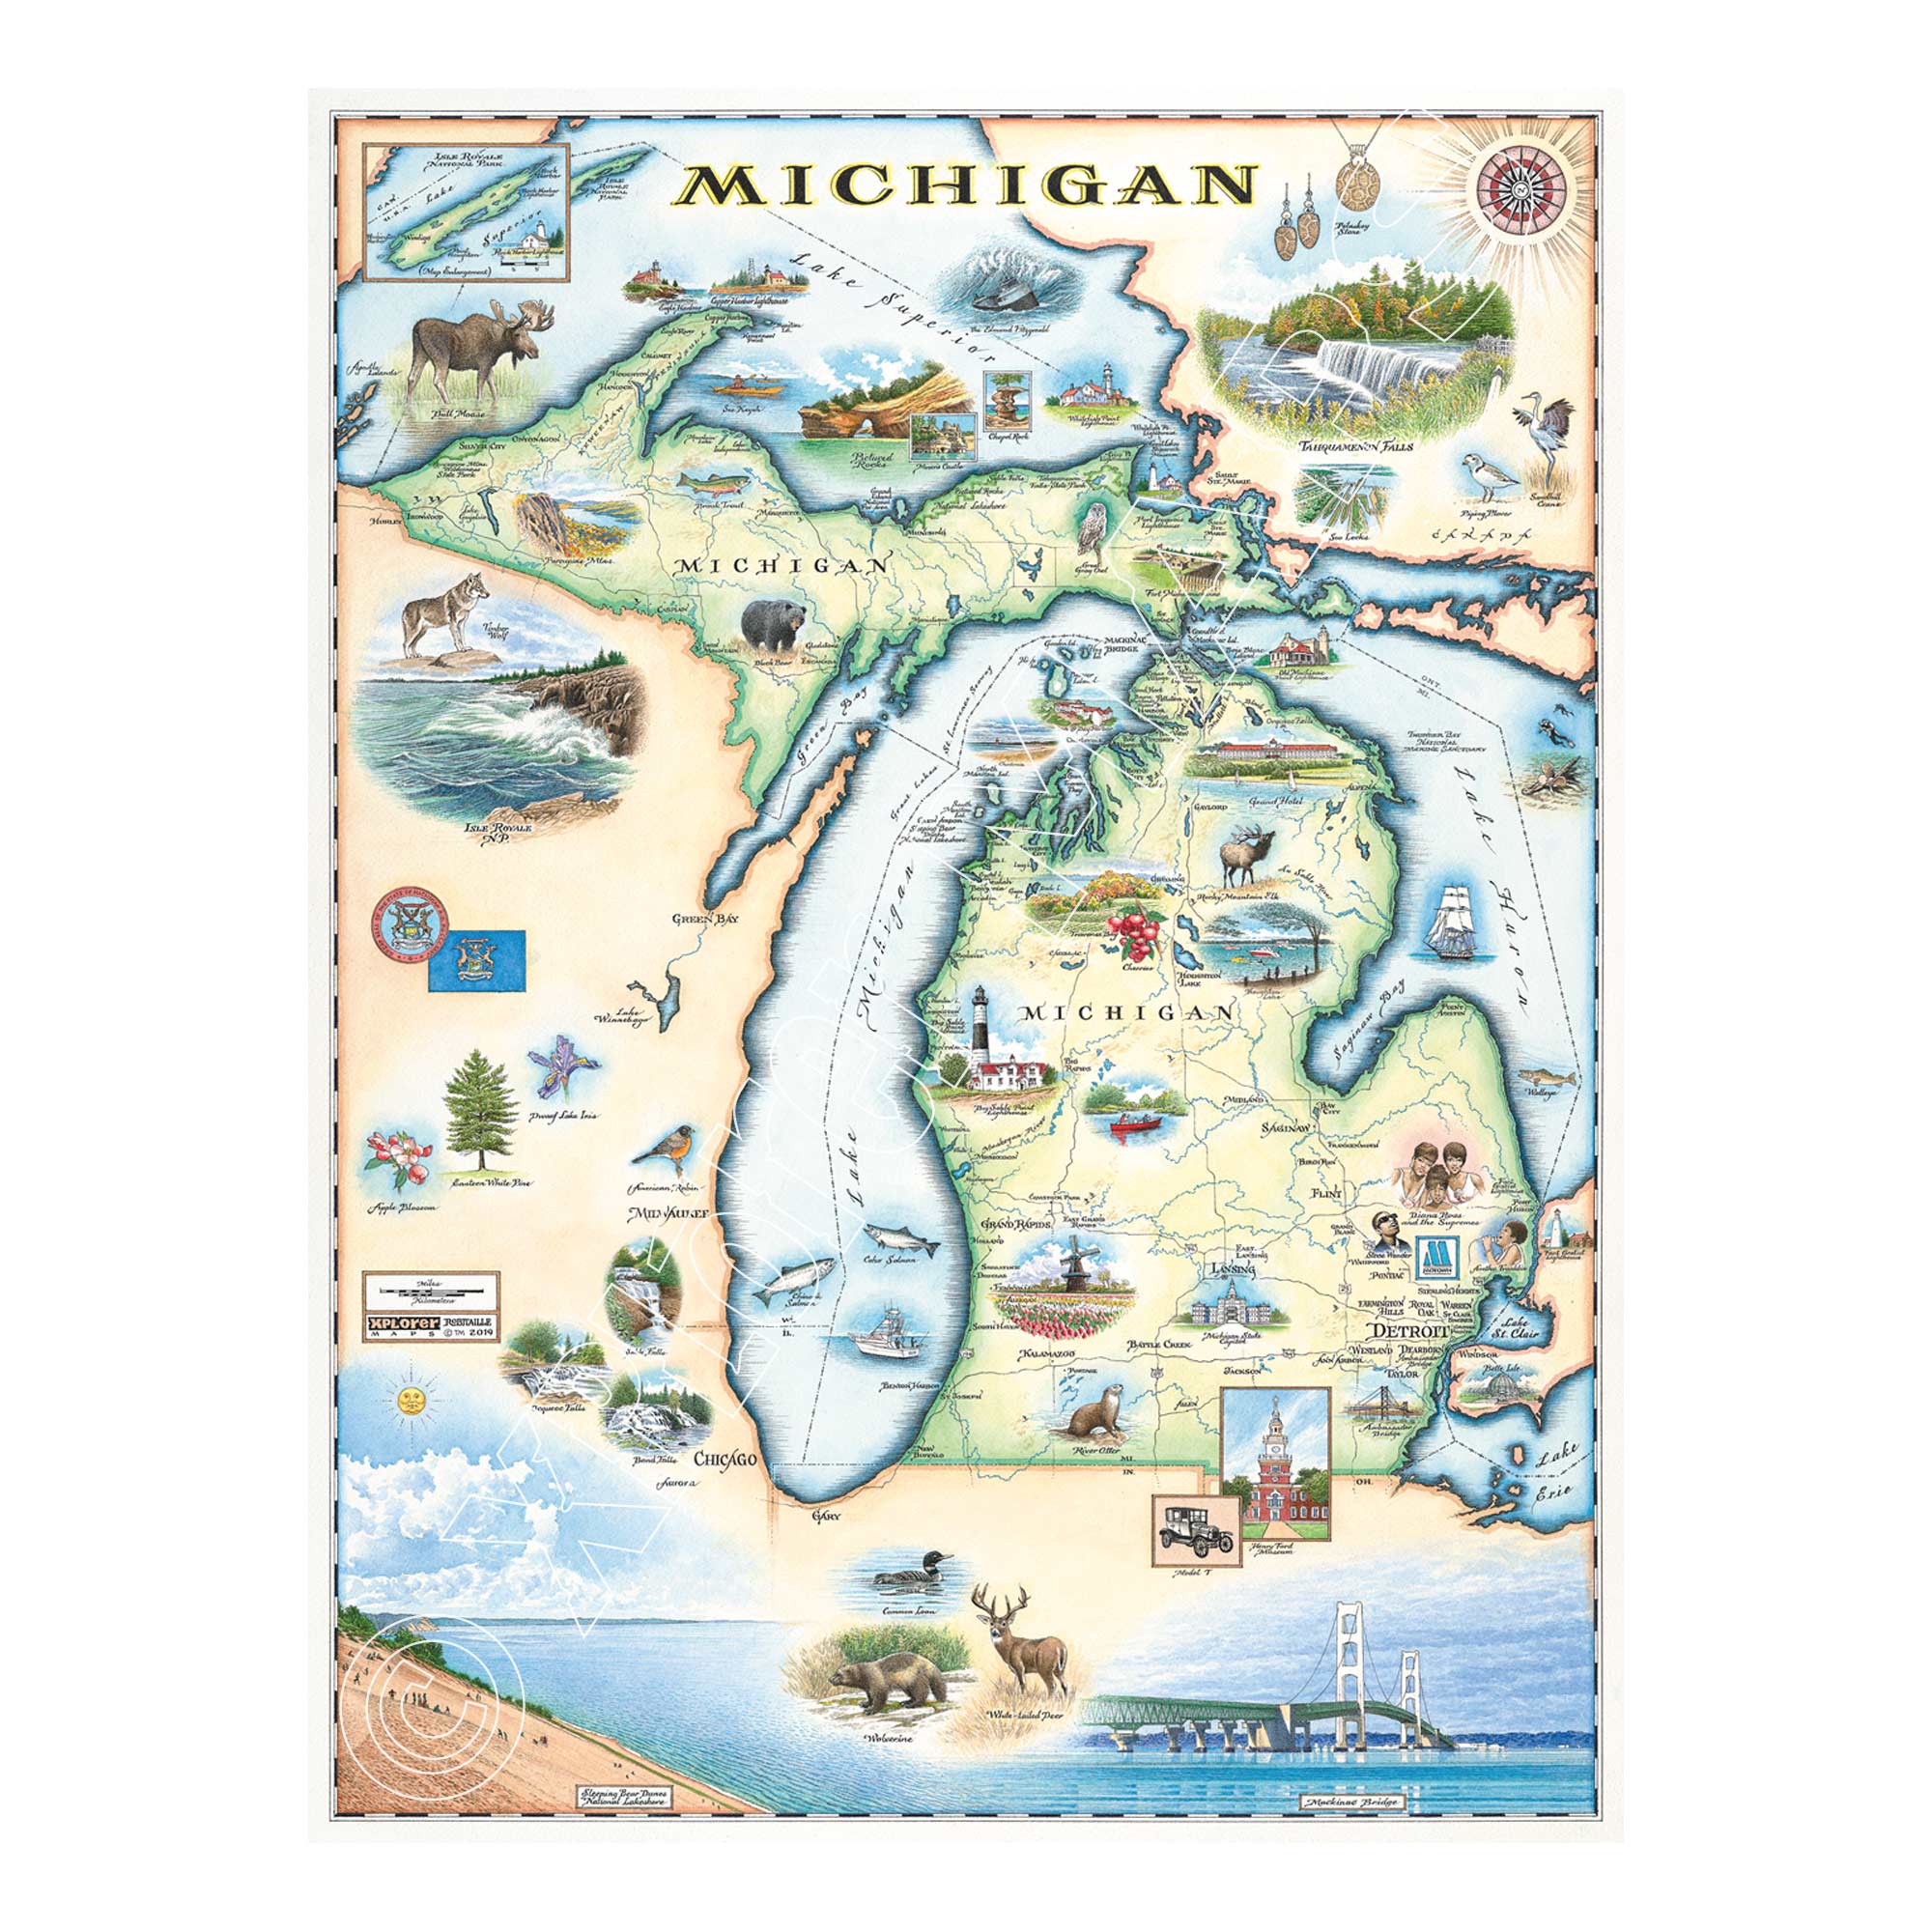 Michigan State Hand-Drawn Map in earth tones. Featuring the Great Lakes, Detroit, Ann Arbor, Grand Rapids, and Lansing in earth tones colors. The Print also features Nature, animals, ducks, deer, fish, moose lighthouses, wolverines, and the Mackinac Bridge. Measures 18x24.